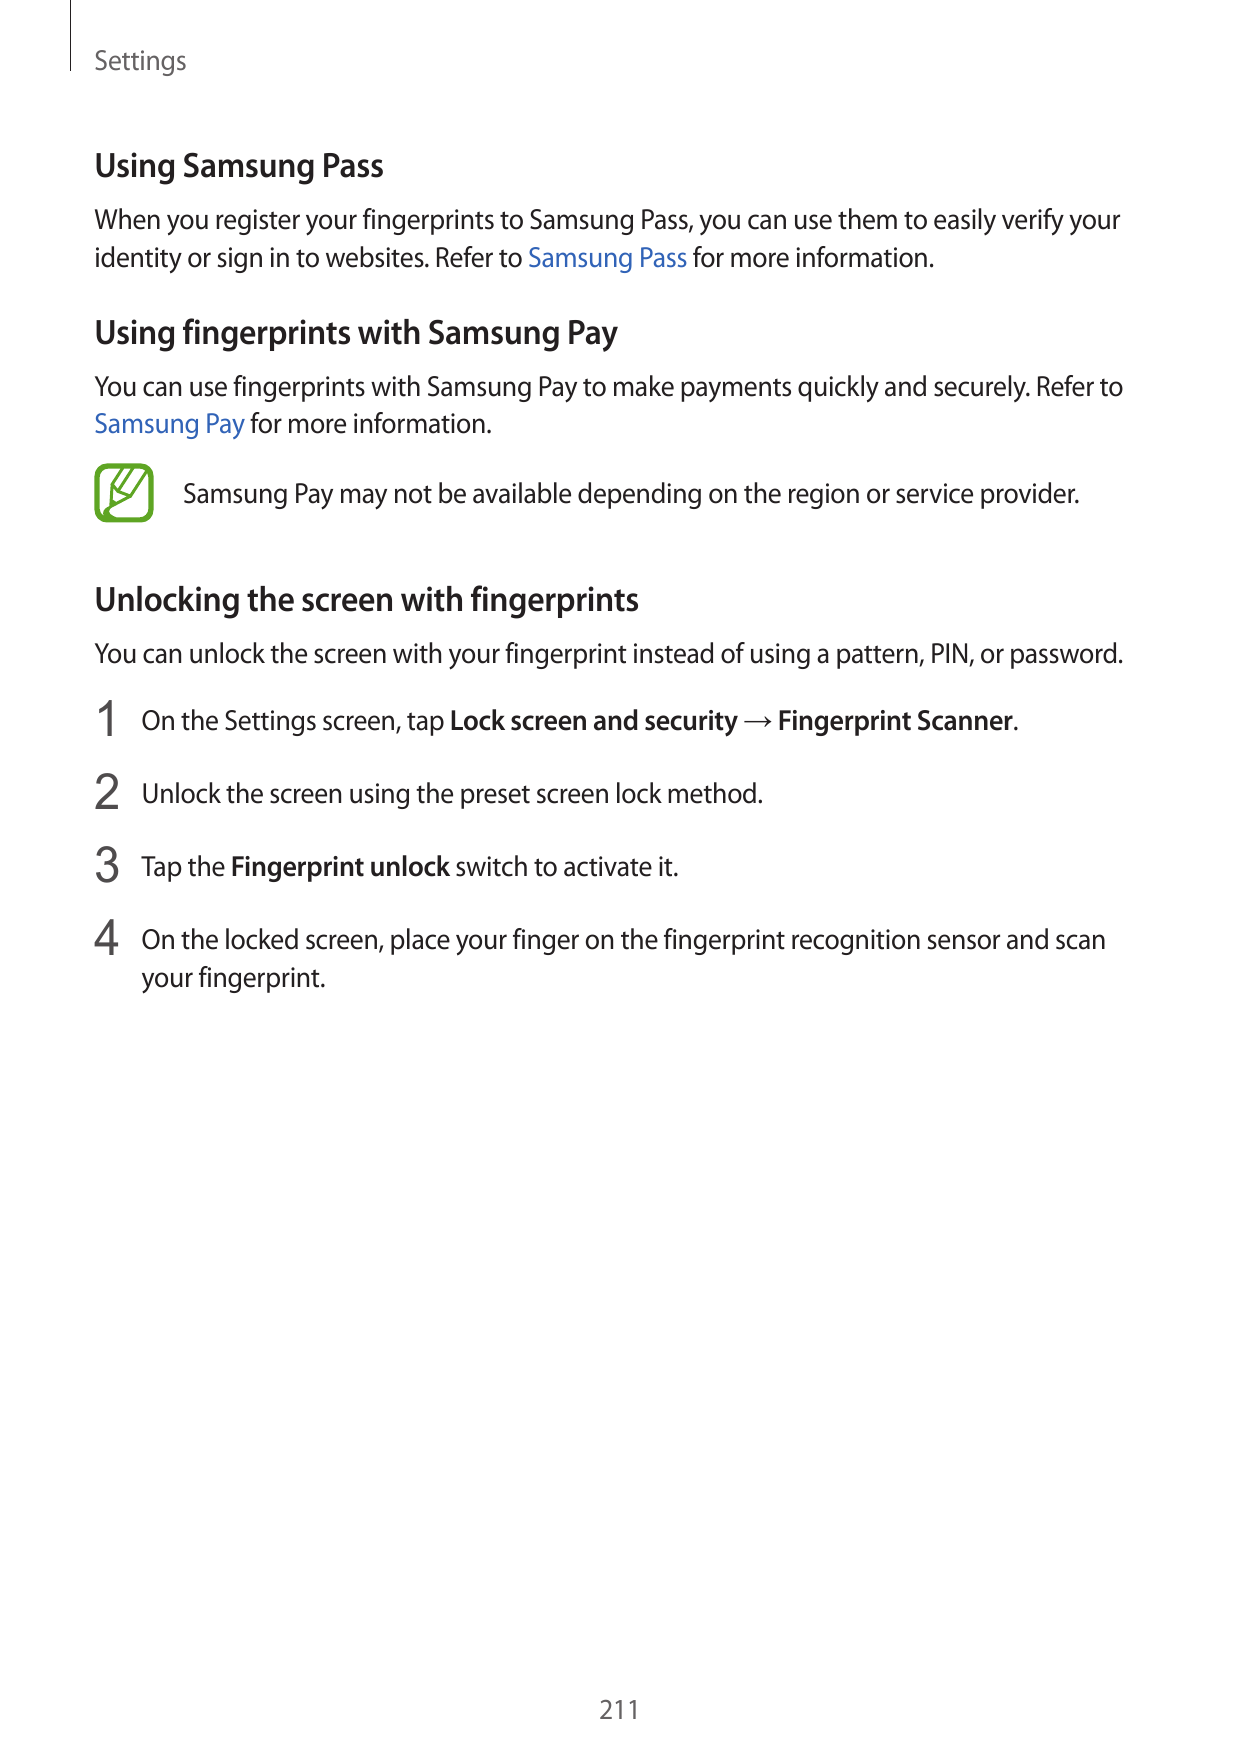 SettingsUsing Samsung PassWhen you register your fingerprints to Samsung Pass, you can use them to easily verify youridentity or